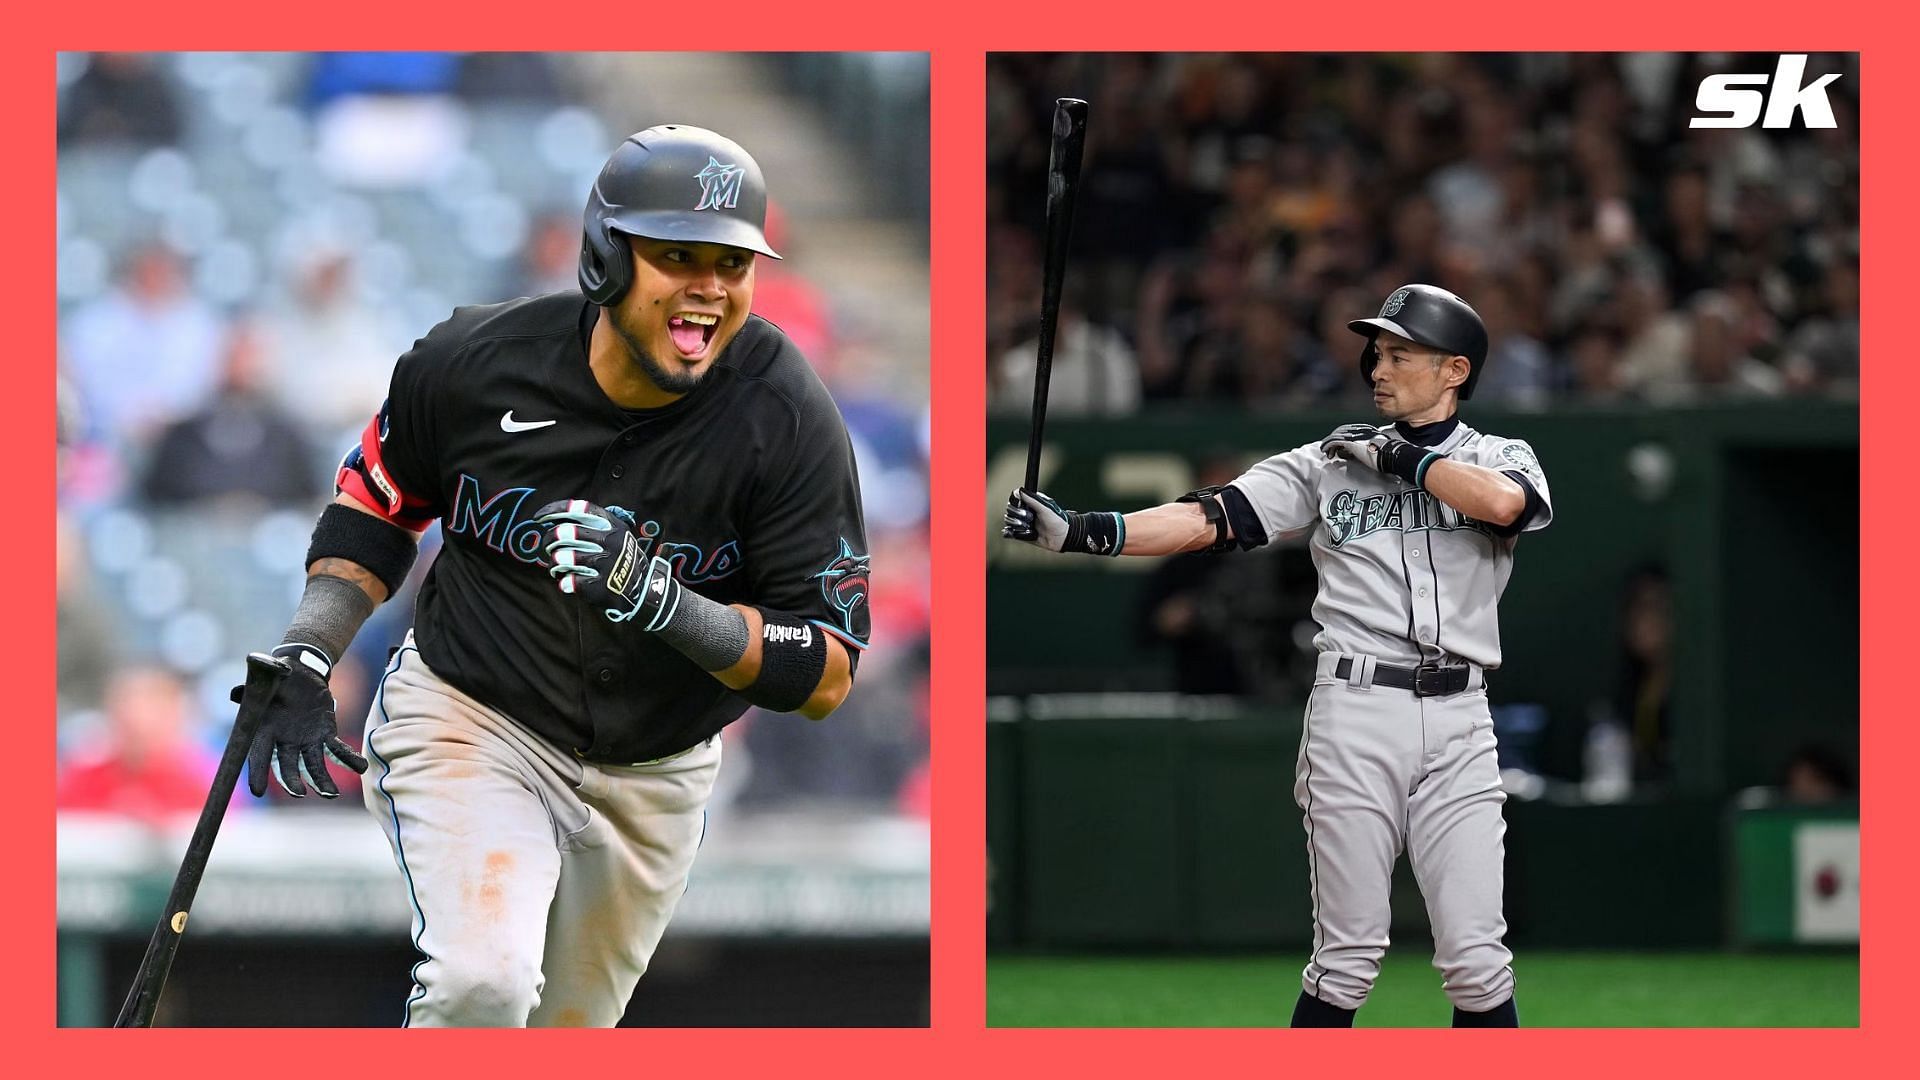 MLB Reddit reacts to Luis Arraez being on pace to match Ichiro Suzuki's  historic 2004 season: Will be exciting as hell if he stays close